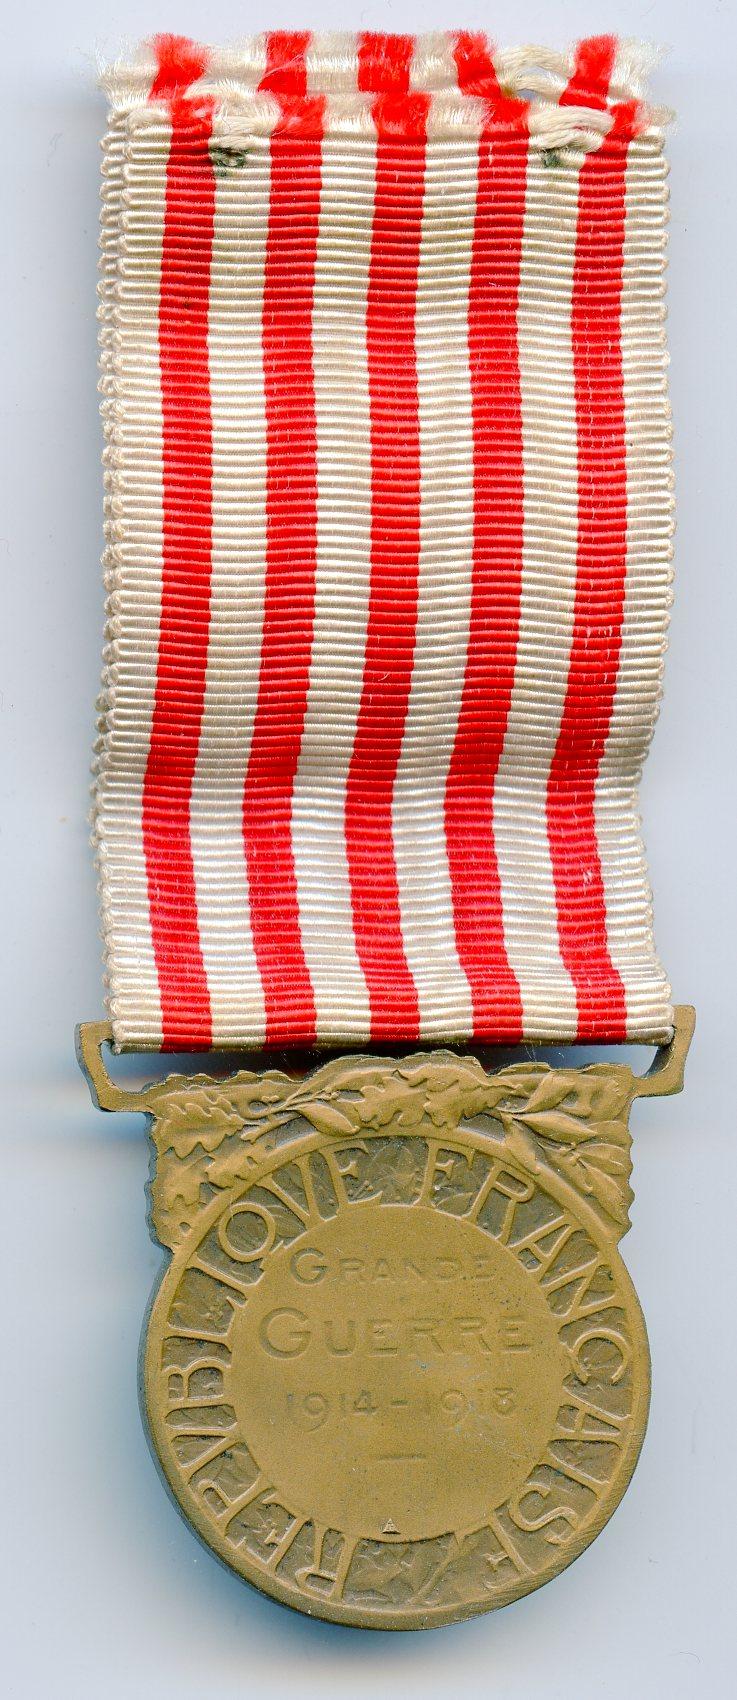 French Medal Commemorative Francaise 1914-18